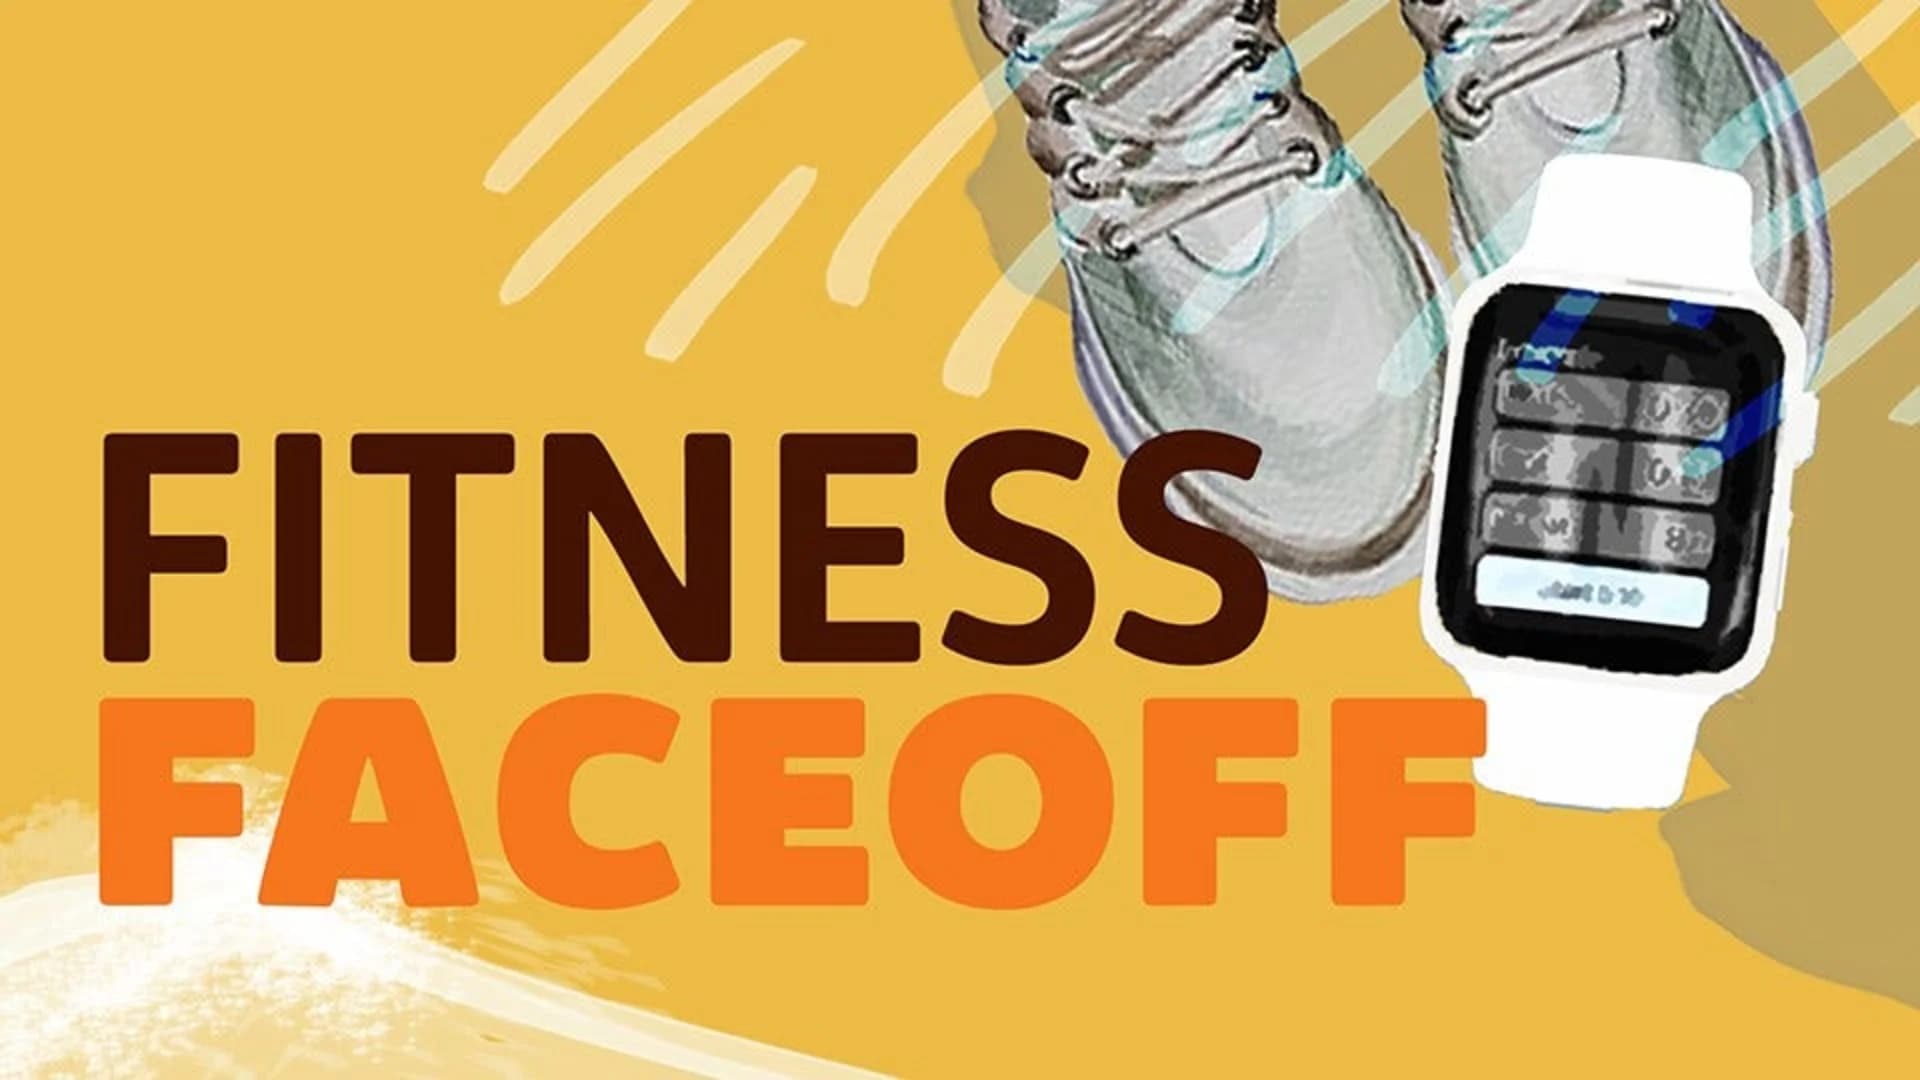 NEWS 12 “FITNESS FACE-OFF” CONTEST OFFICIAL RULES